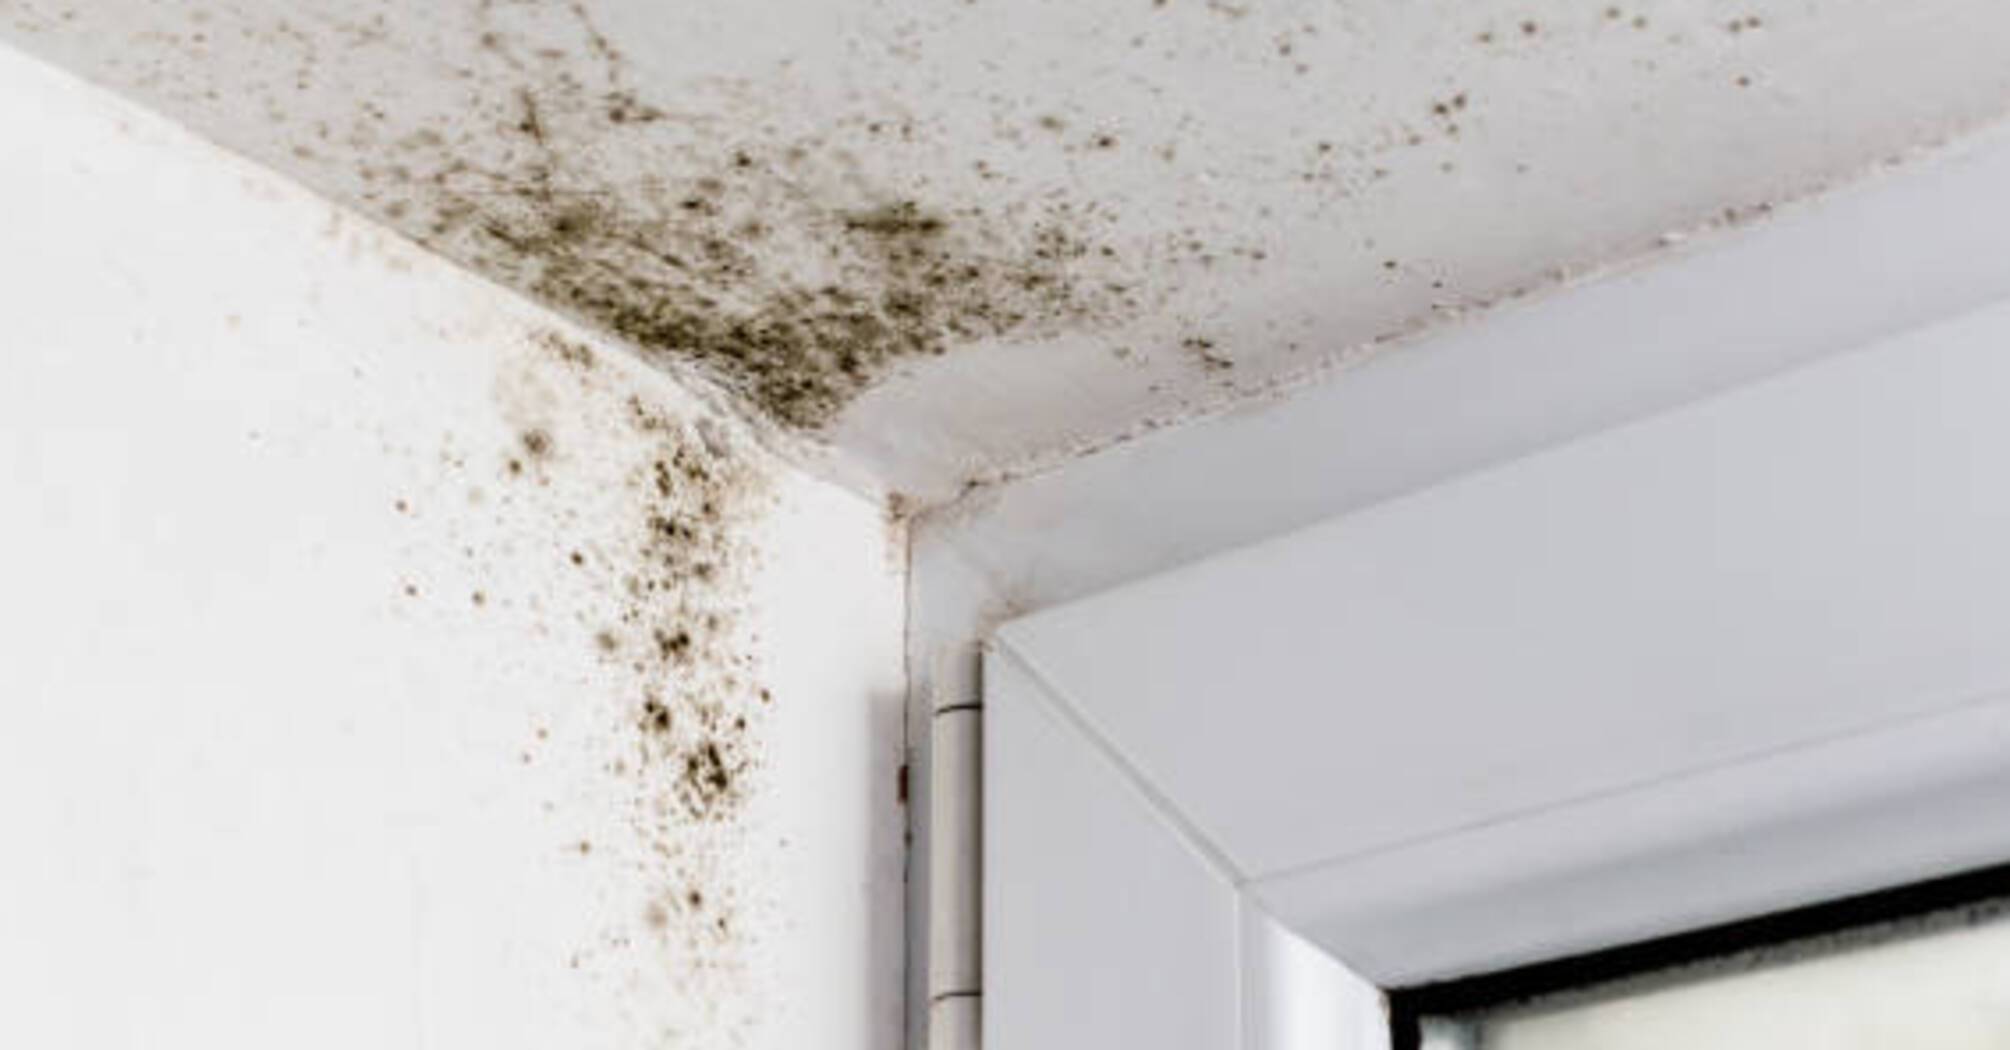 How to get rid of mold on ceilings and walls: 3 useful life hacks